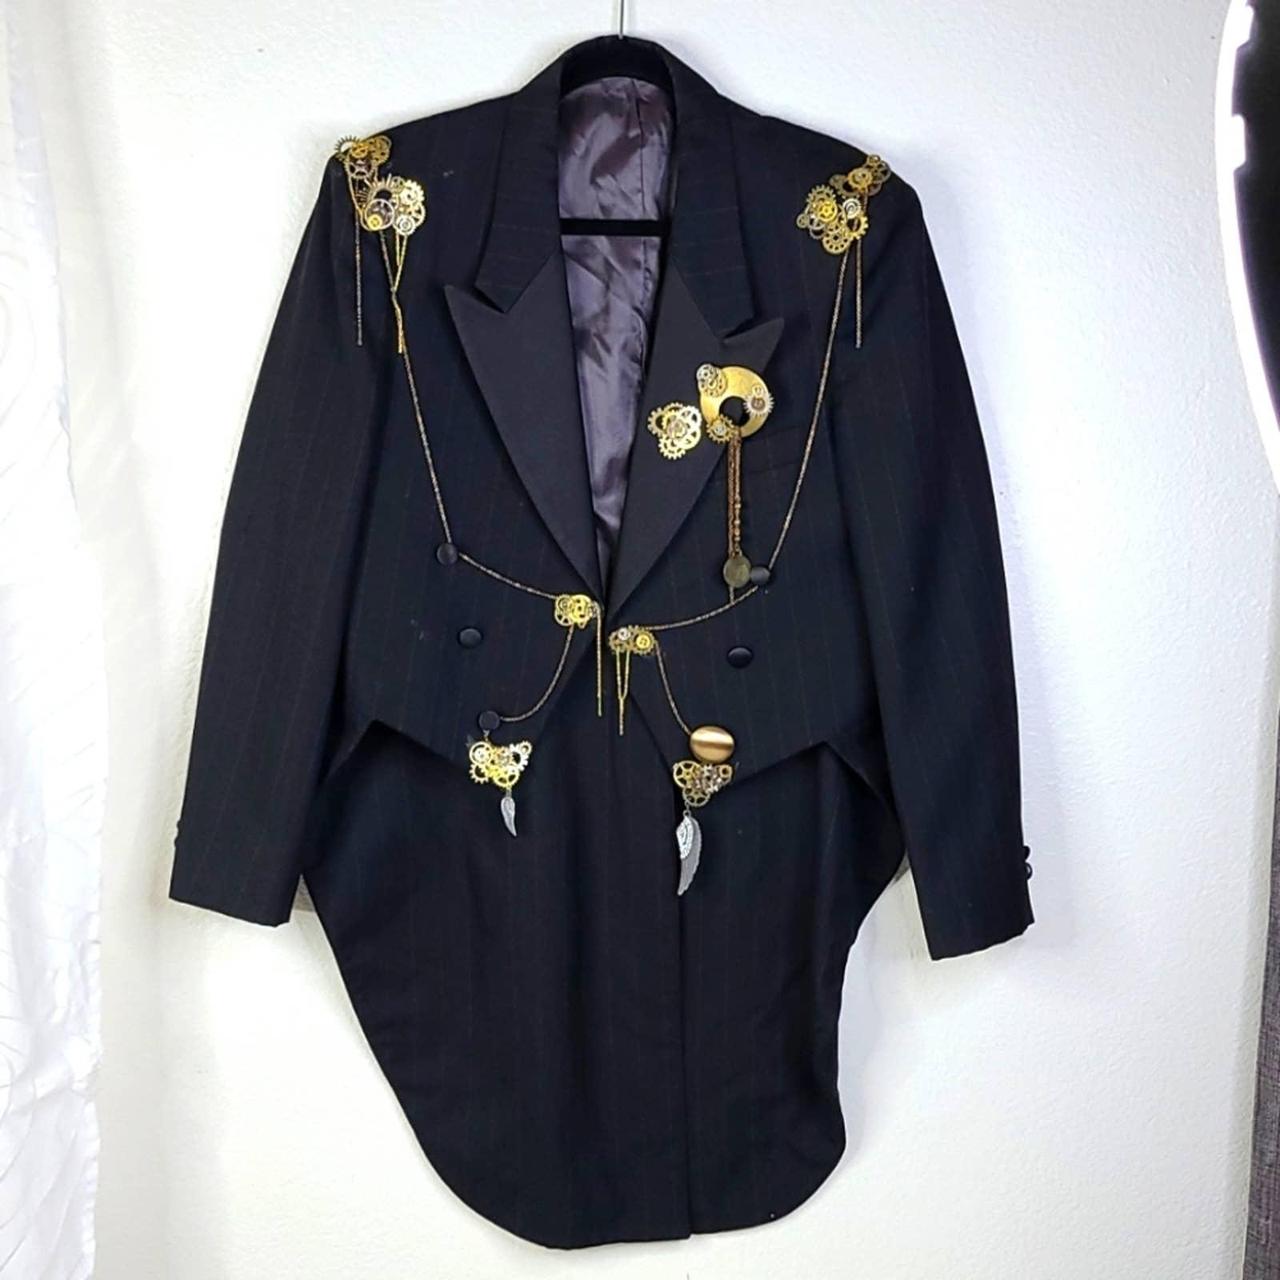 After Six Men's Black and Gold Jacket (2)